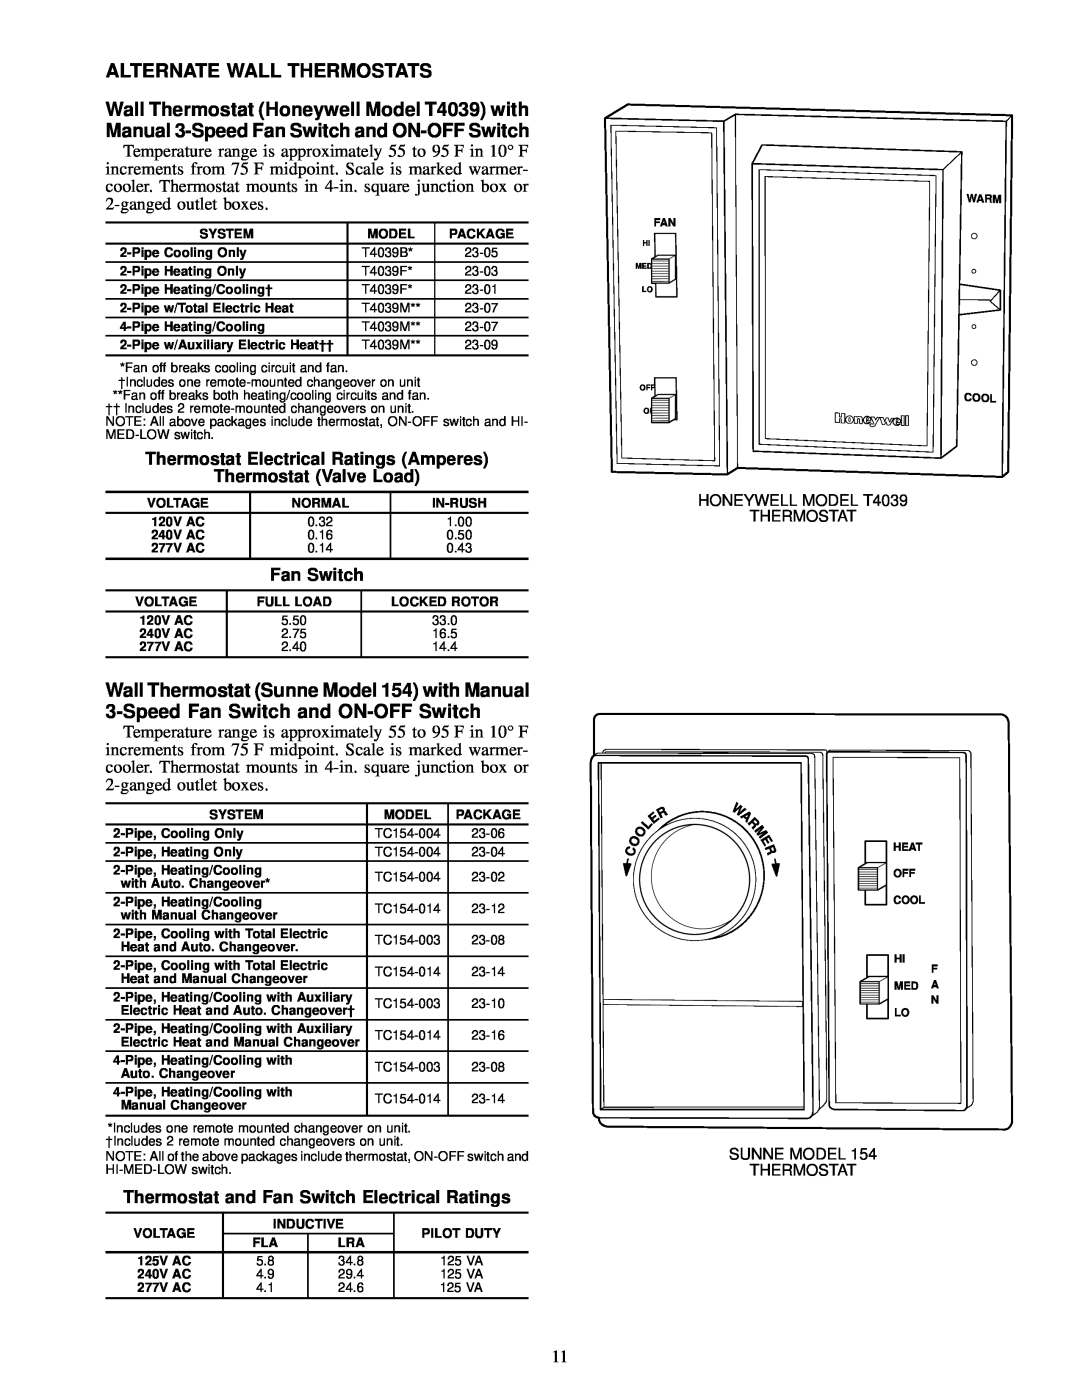 Carrier 42 SERIES specifications Alternate Wall Thermostats 